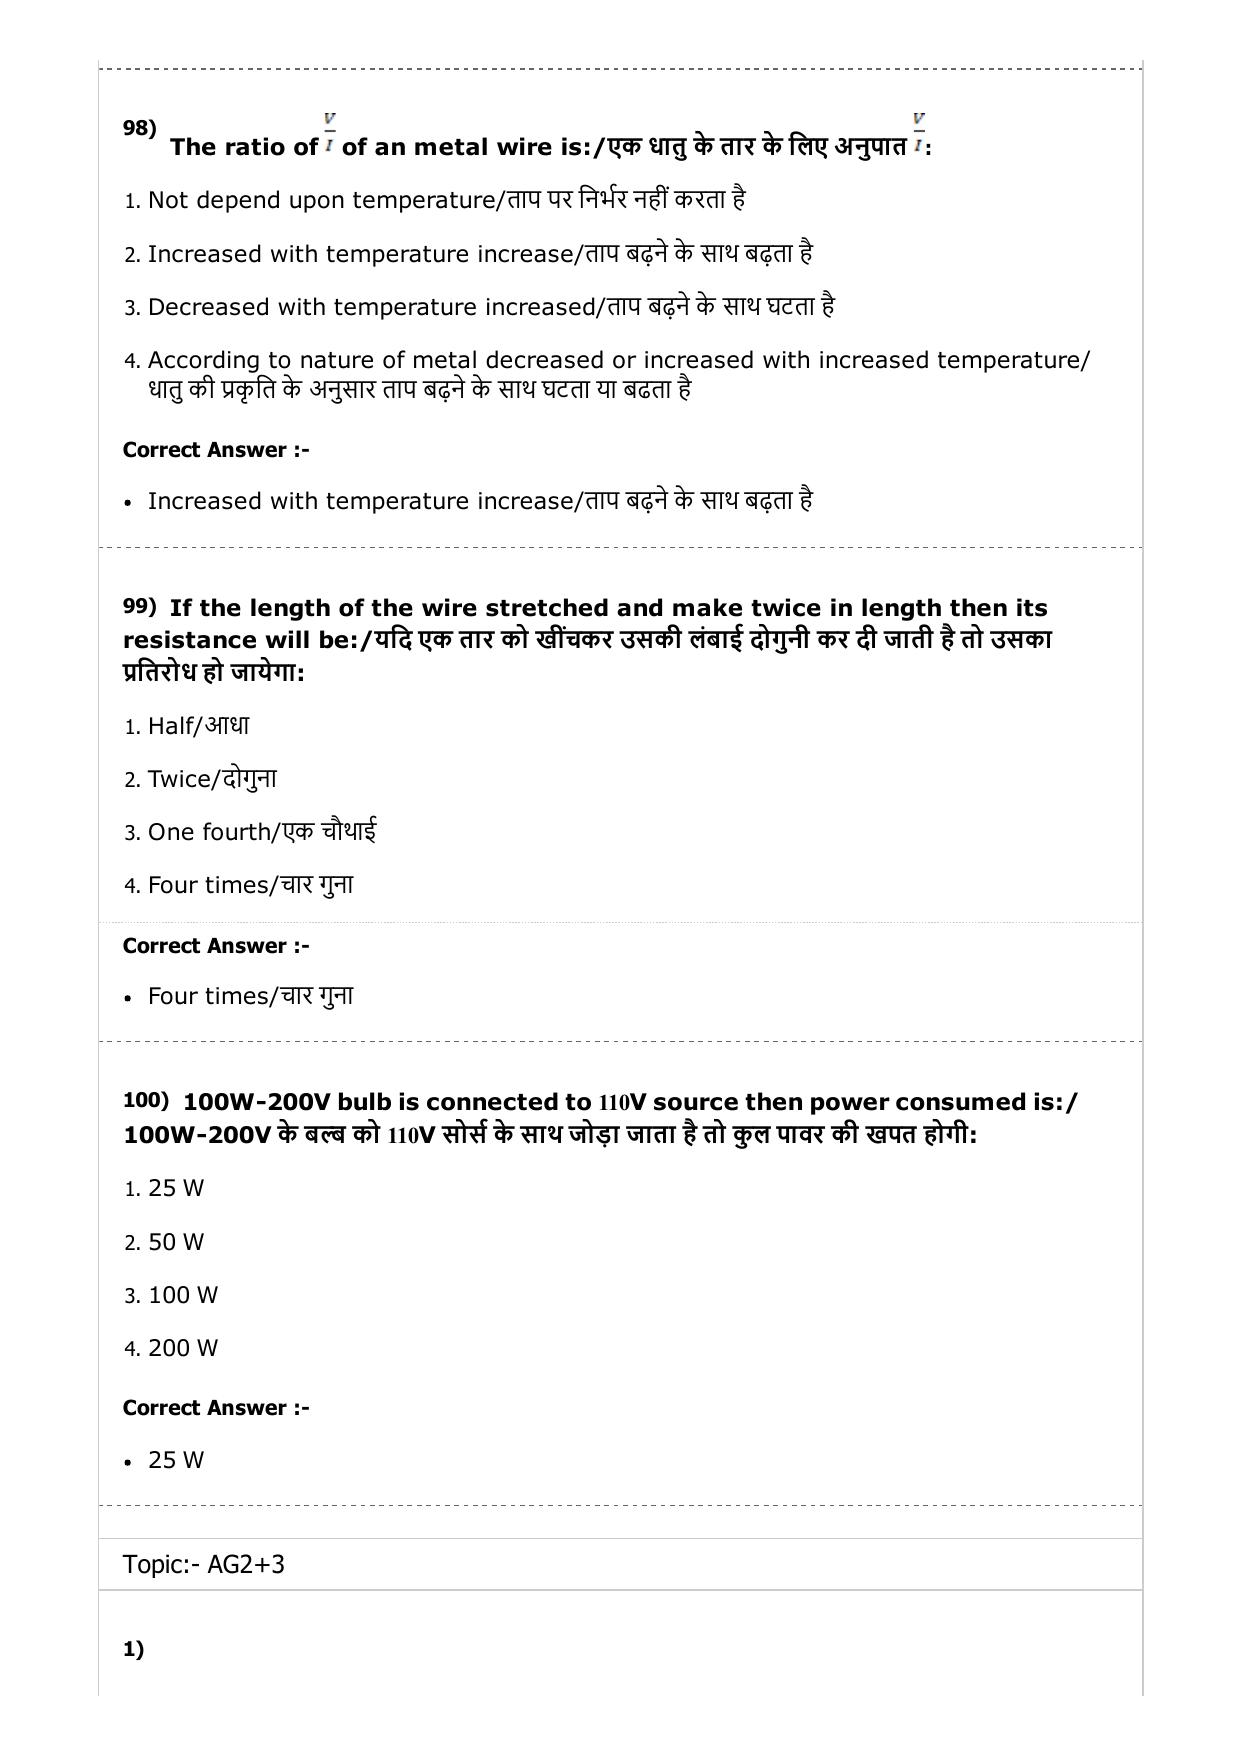 MP PAT (Exam. Date 23/04/2017 Time 9:00 AM to 12:00 Noon) - Agriculture Question Paper - Page 30